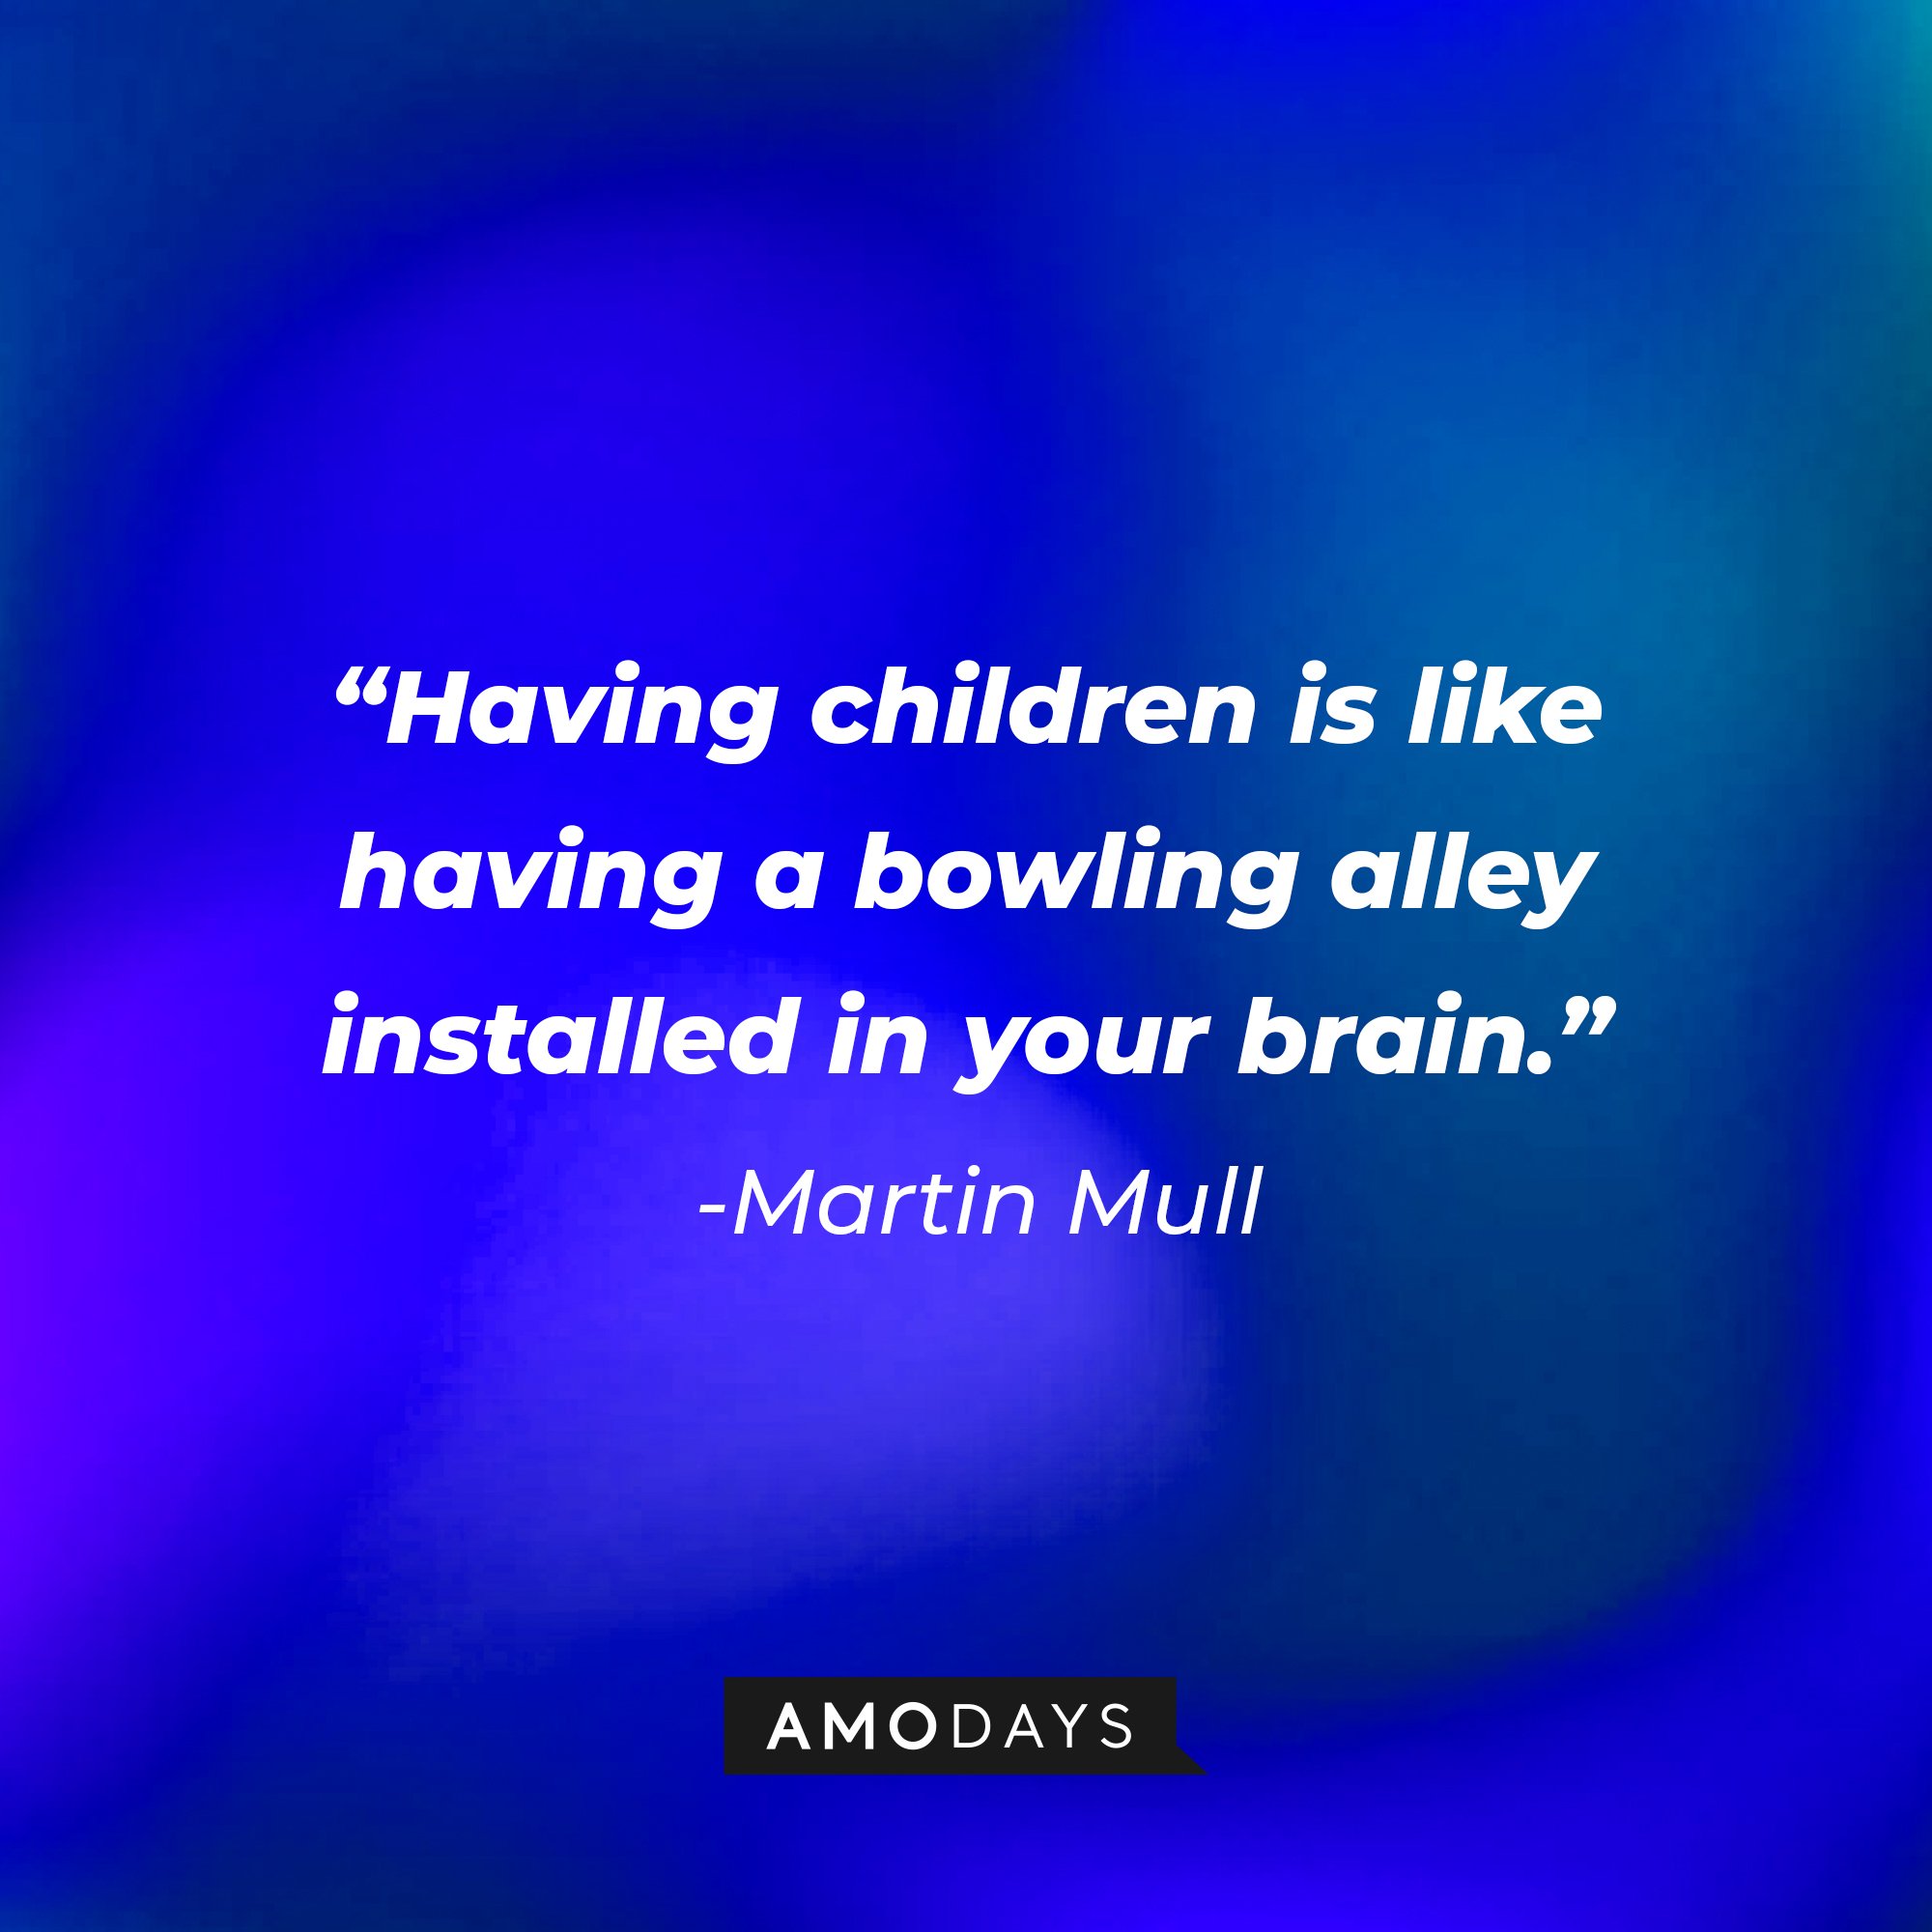 Martin Mull's quote: "Having children is like having a bowling alley installed in your brain." | Image: AmoDays